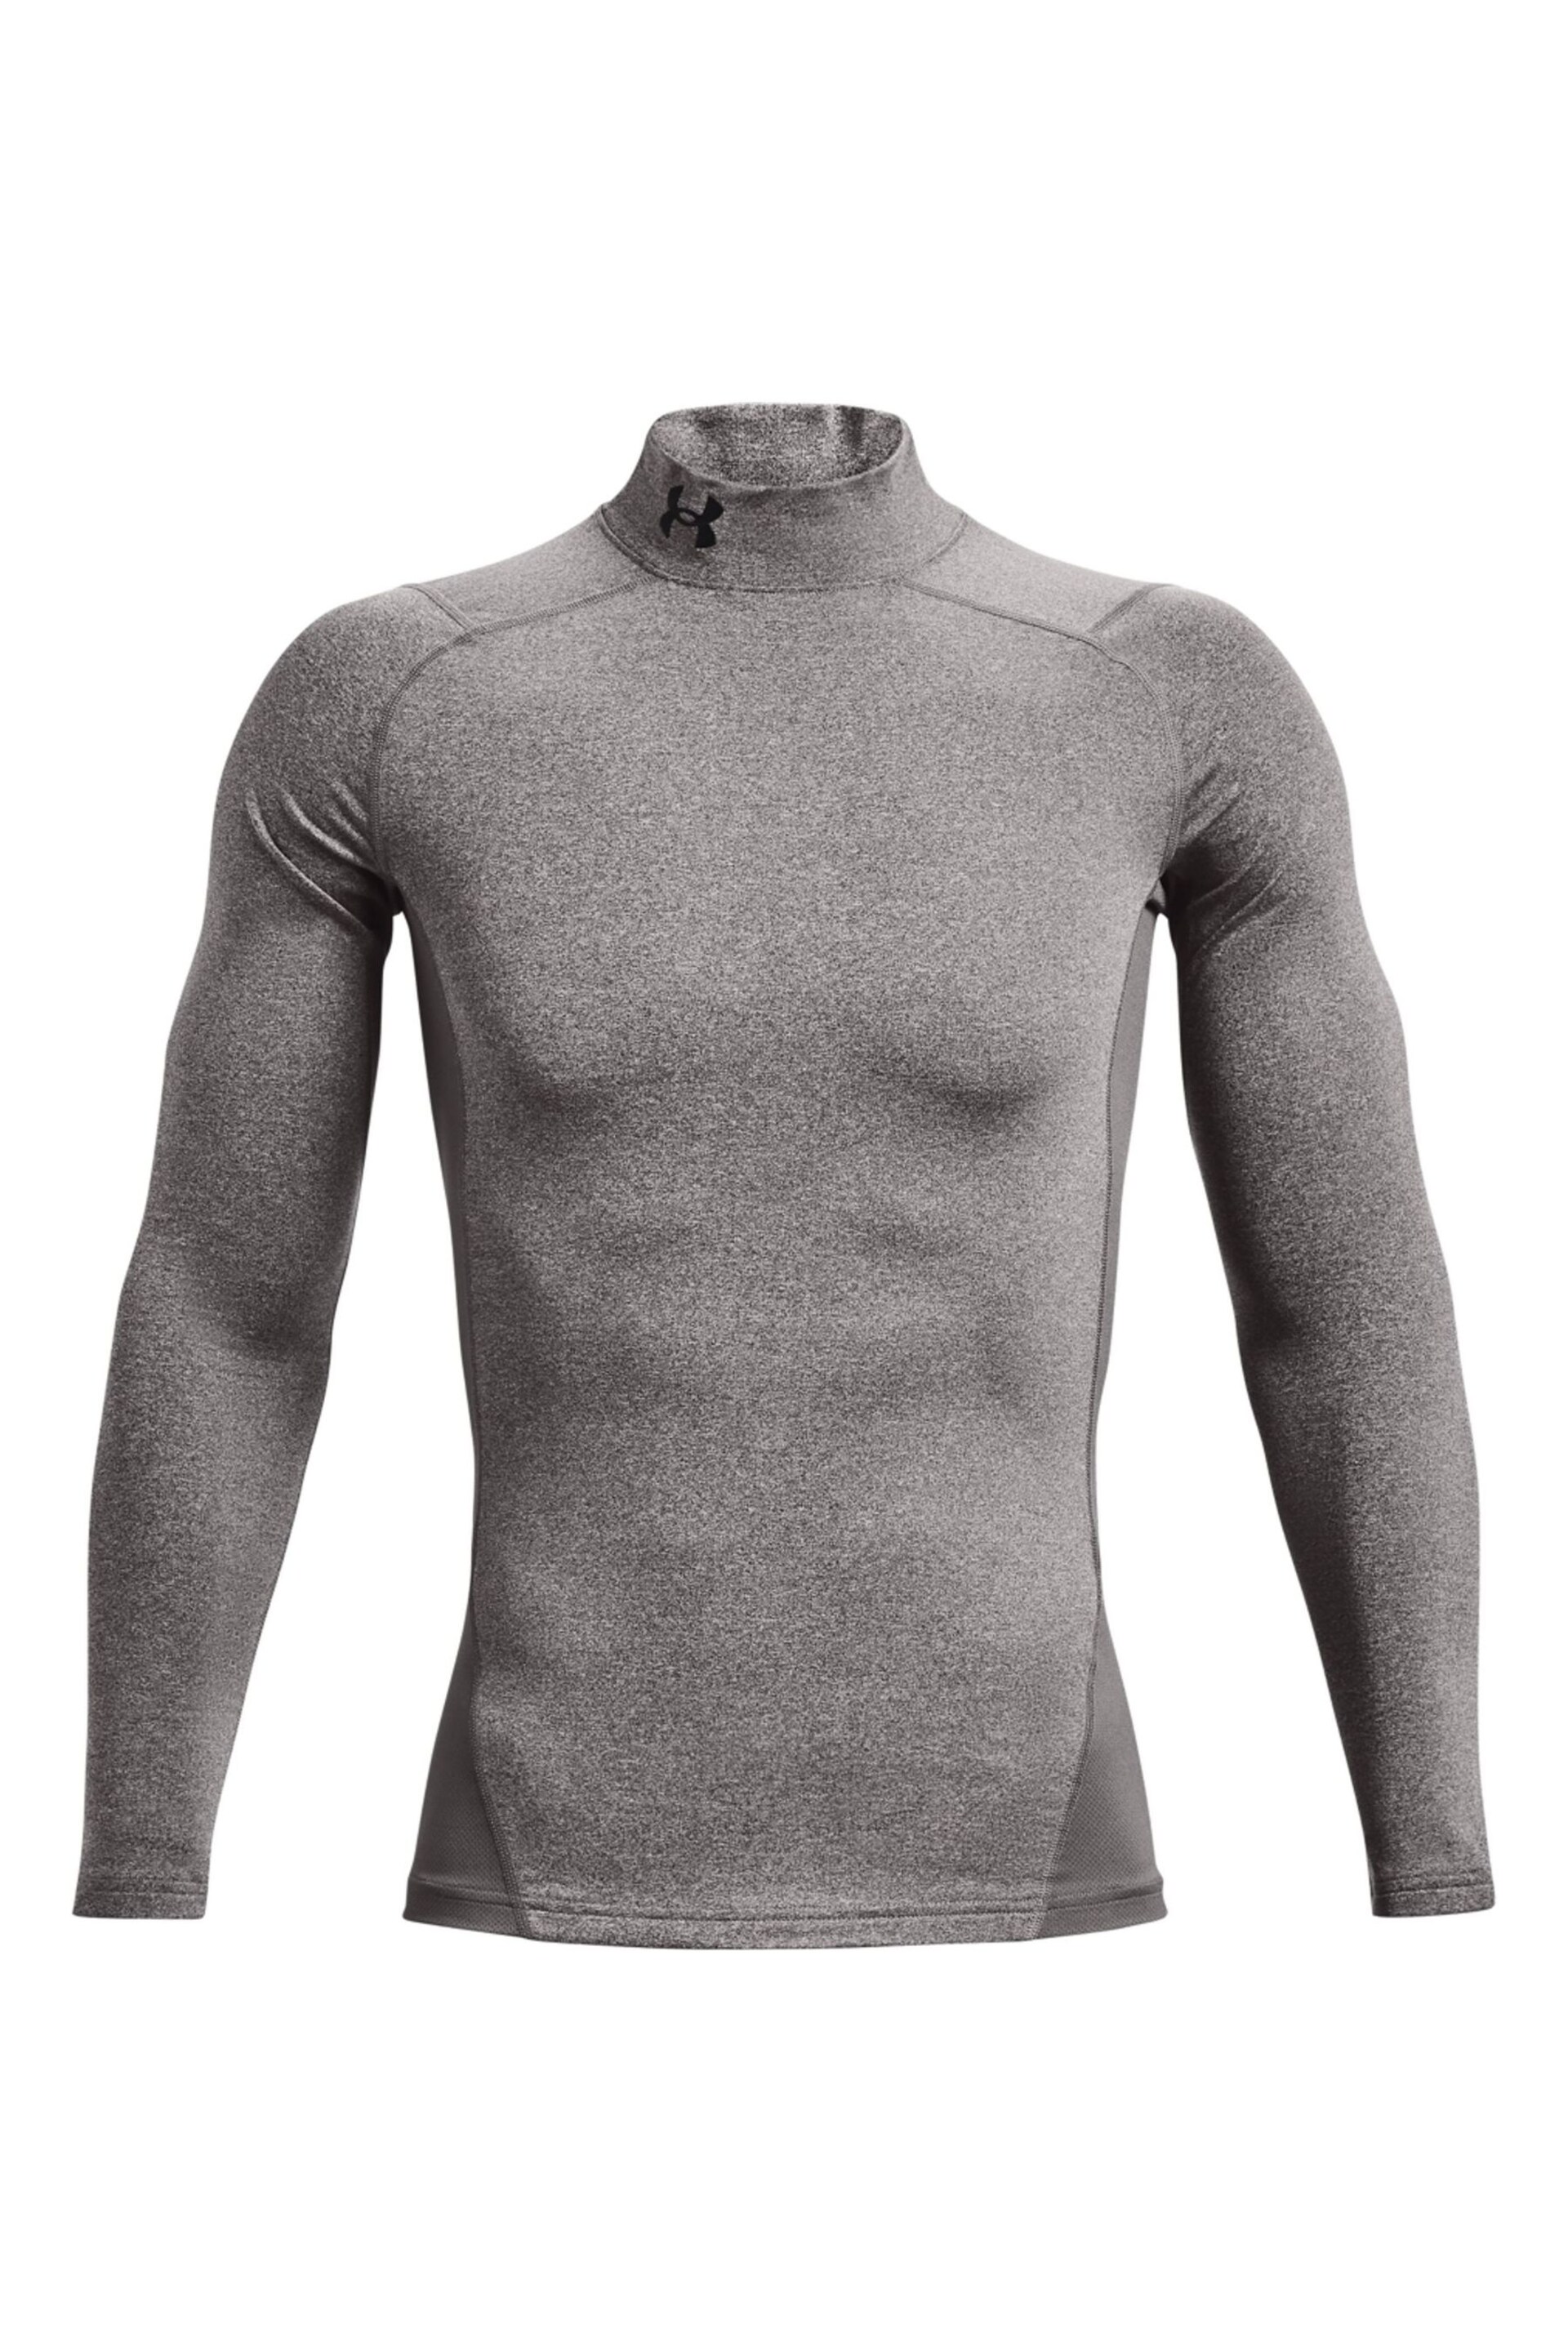 Under Armour Charcoal Grey Under Armour Charcoal Grey Coldgear Mock Neck Base Layer - Image 5 of 6